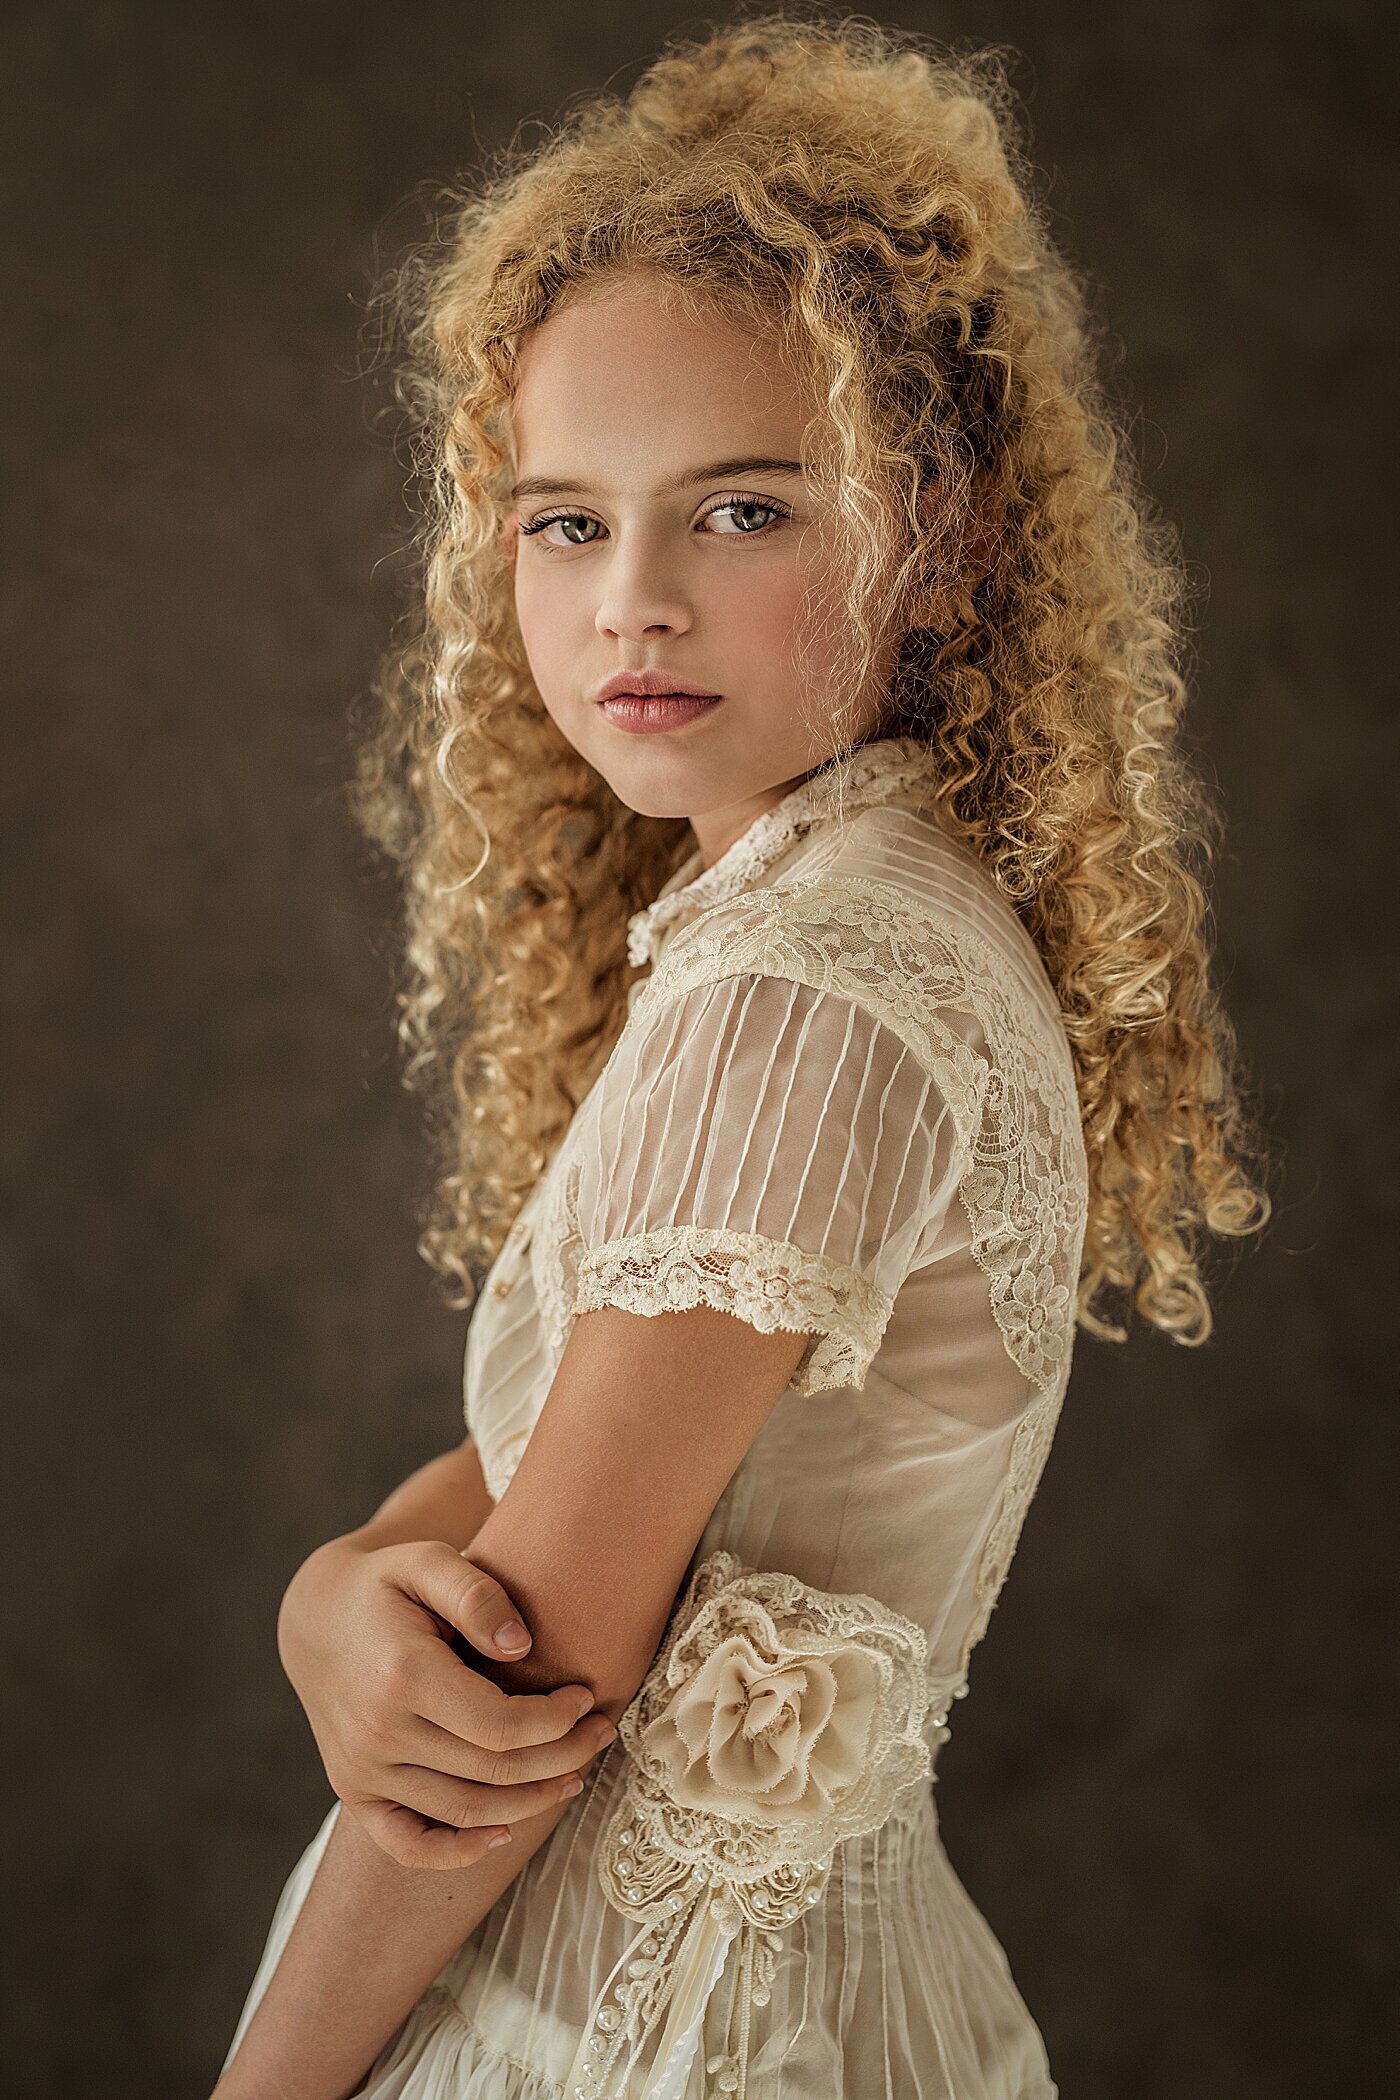 Girl-with-curl-by-Olessia-McGregor-Brisbane-Child-Creative-Fine-Art-Photographer